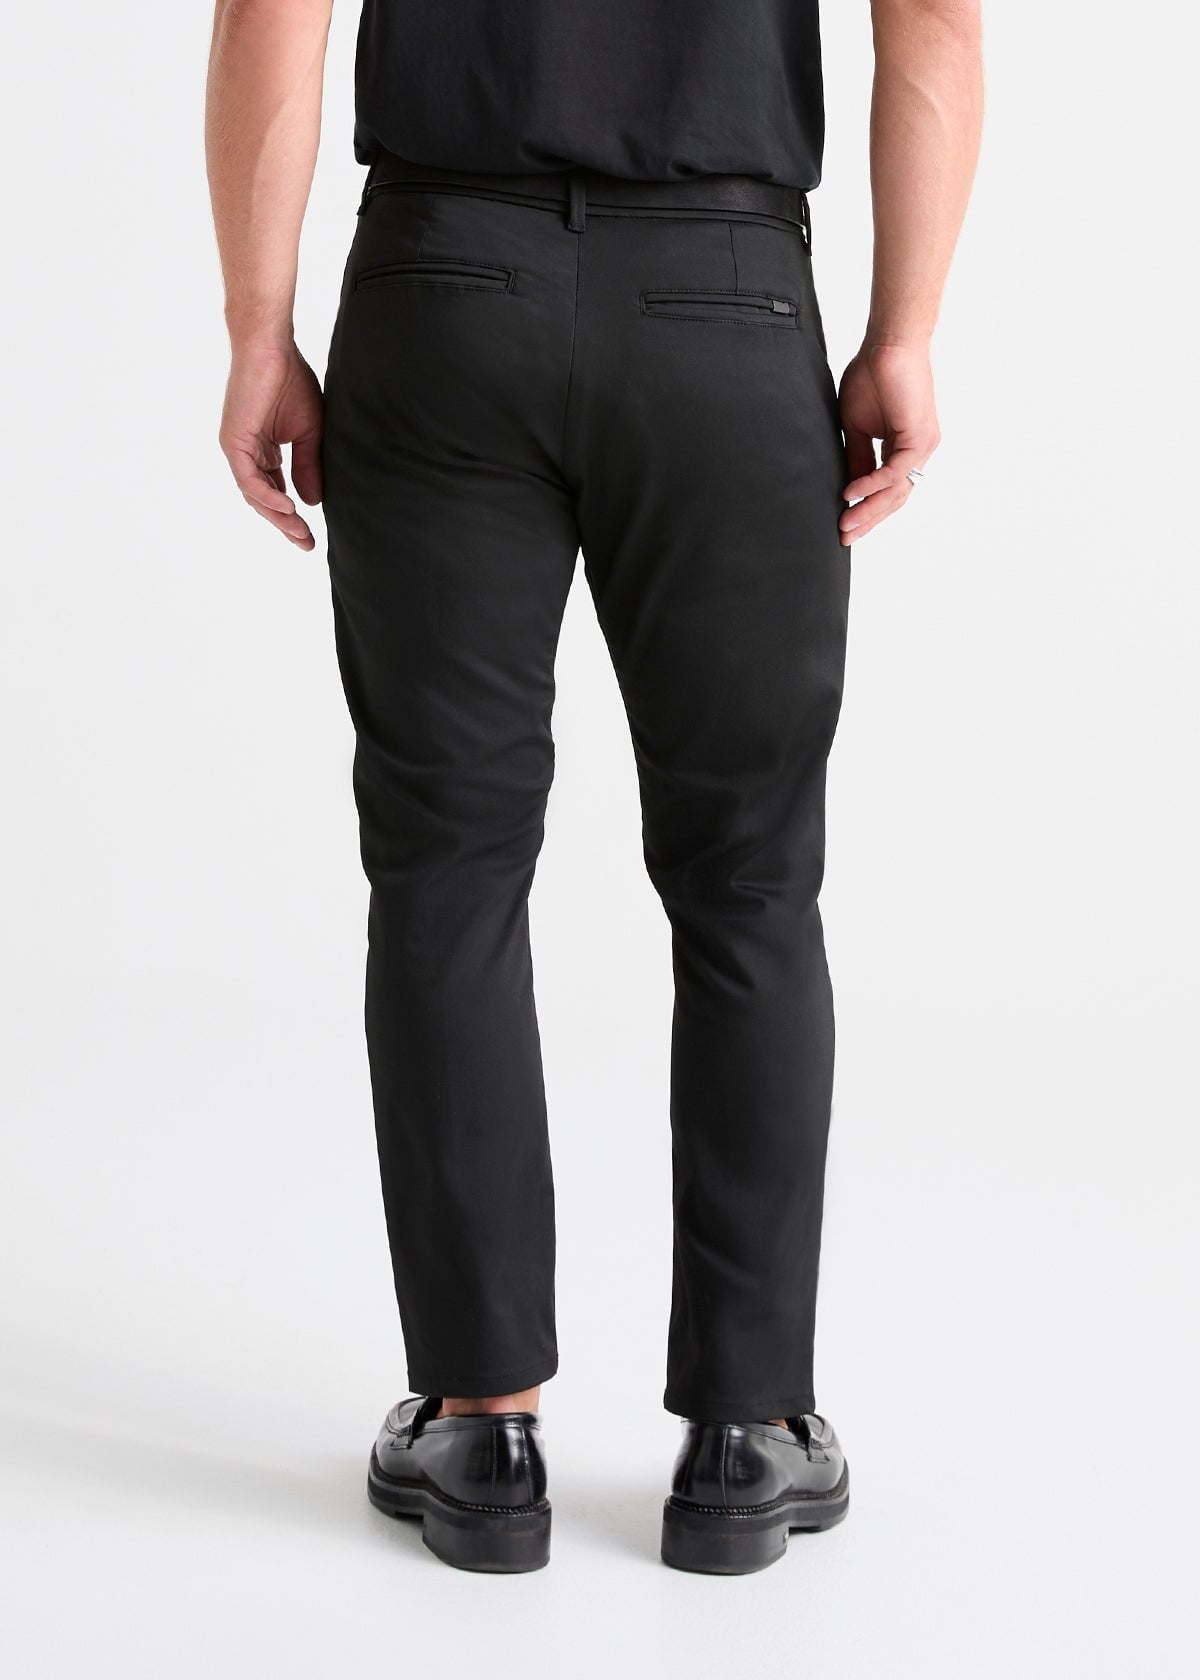 mens black relaxed stretch fit dress pant back